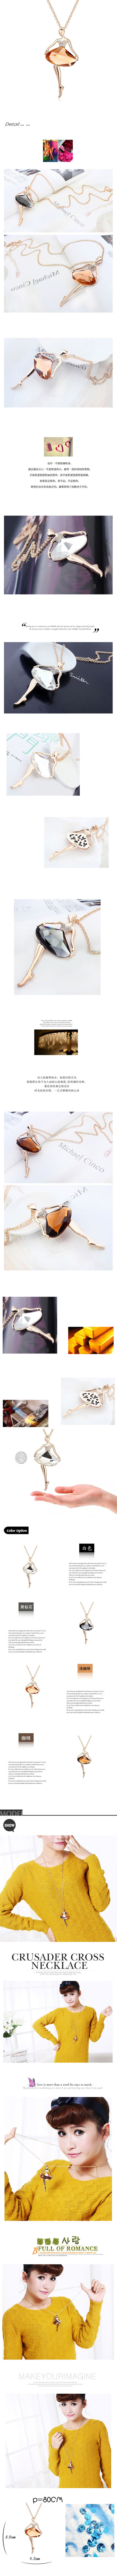 Direct Coffee Ballet Dancer Pendant Glass Crystal Necklaces,Crystal Necklaces